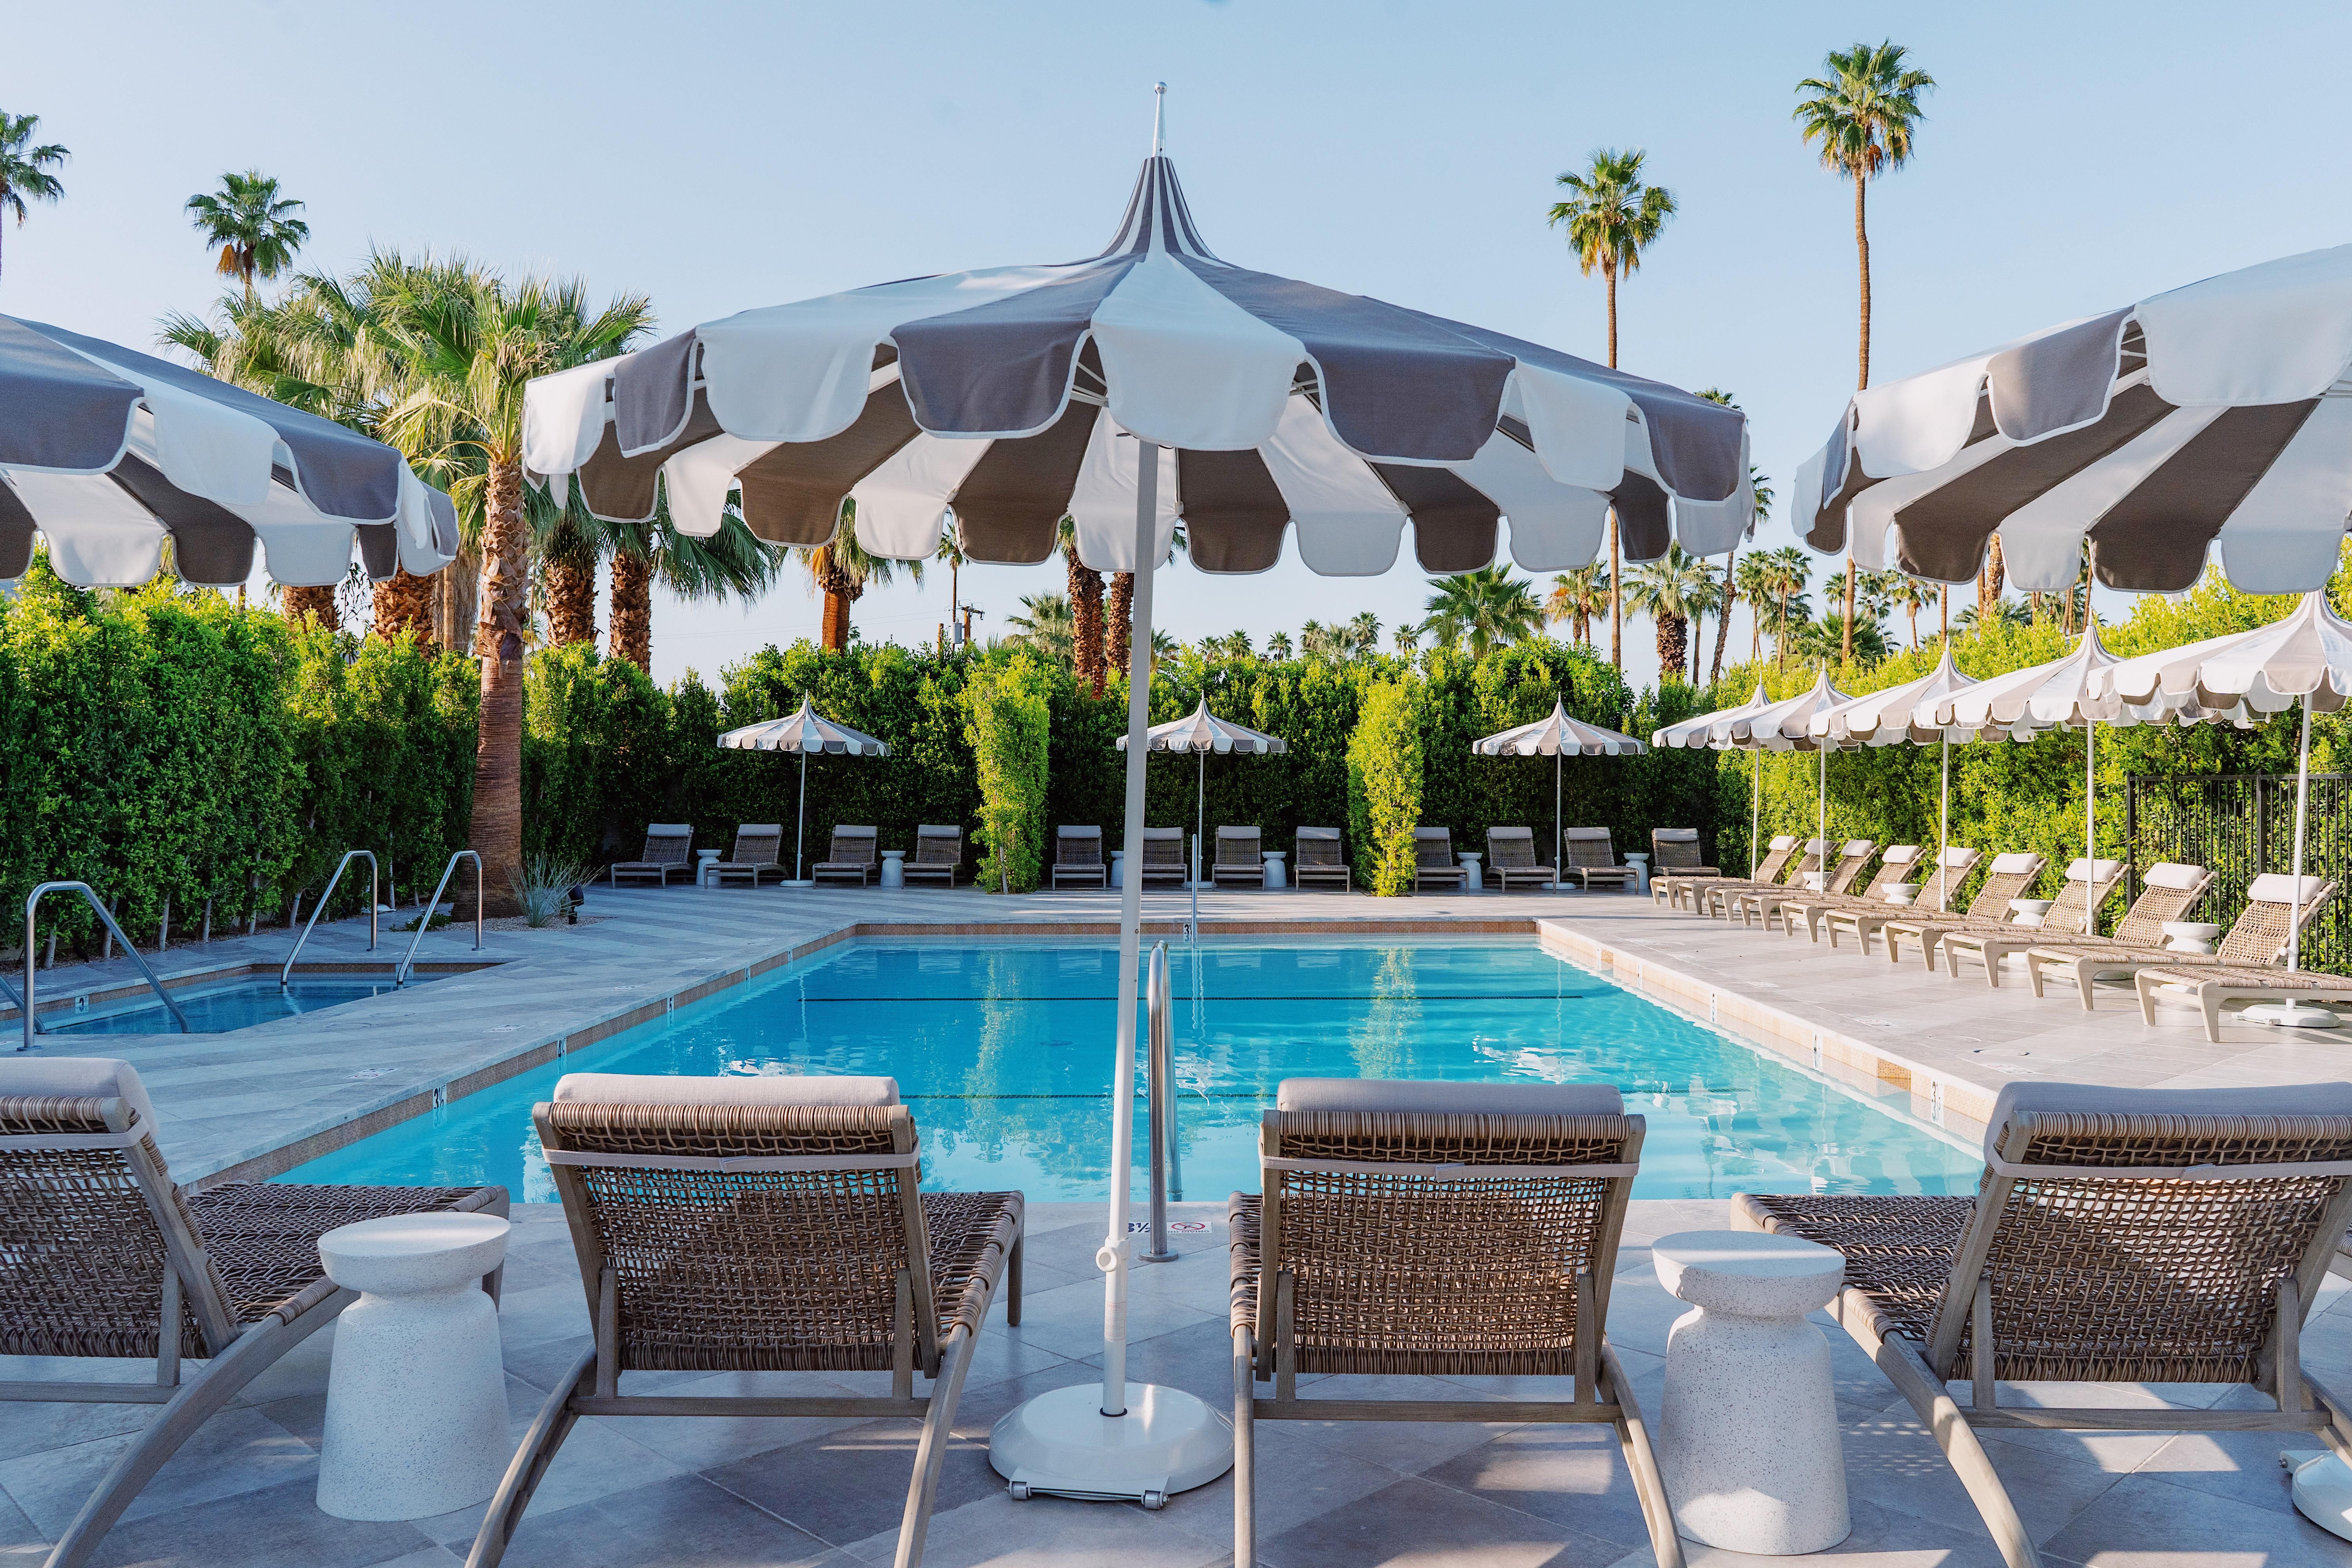 Revisit Palm Springs: A Poolside Retreat, the Hot New Restaurant + Throwback Speakeasies